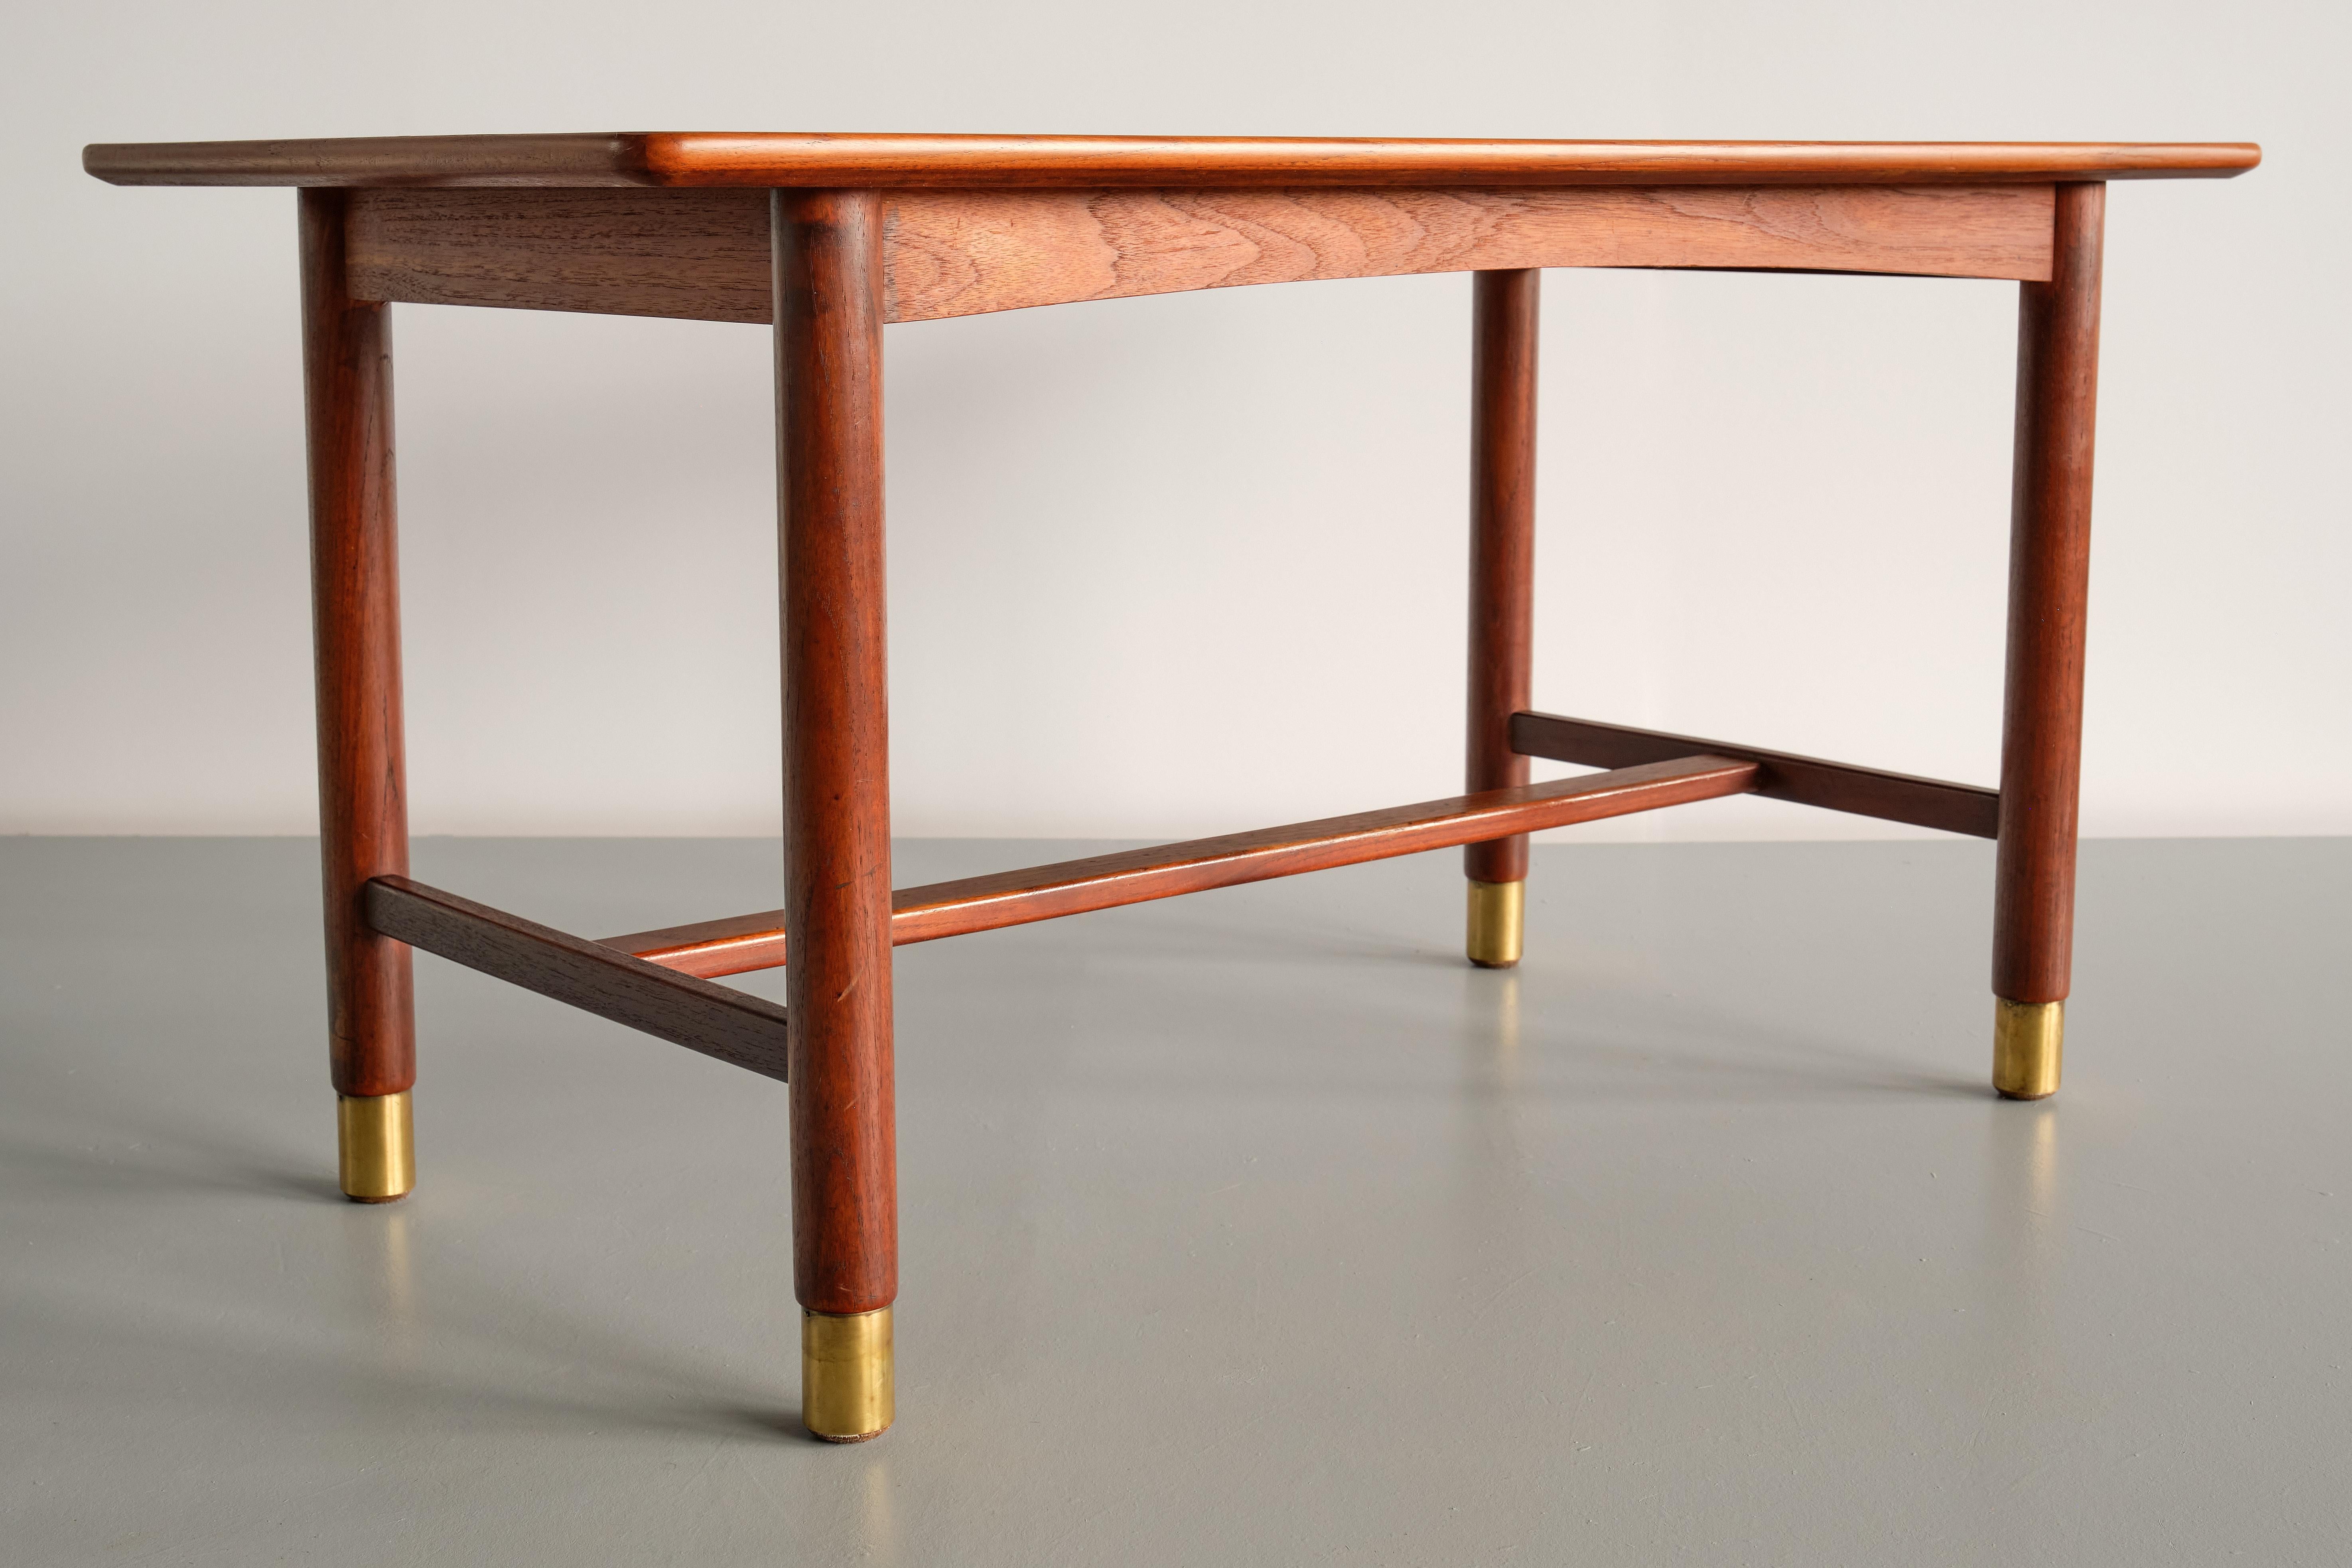 Mid-20th Century Carl Axel Acking Coffee Table in Teak and Brass, SMF Bodafors, Sweden, 1950s For Sale